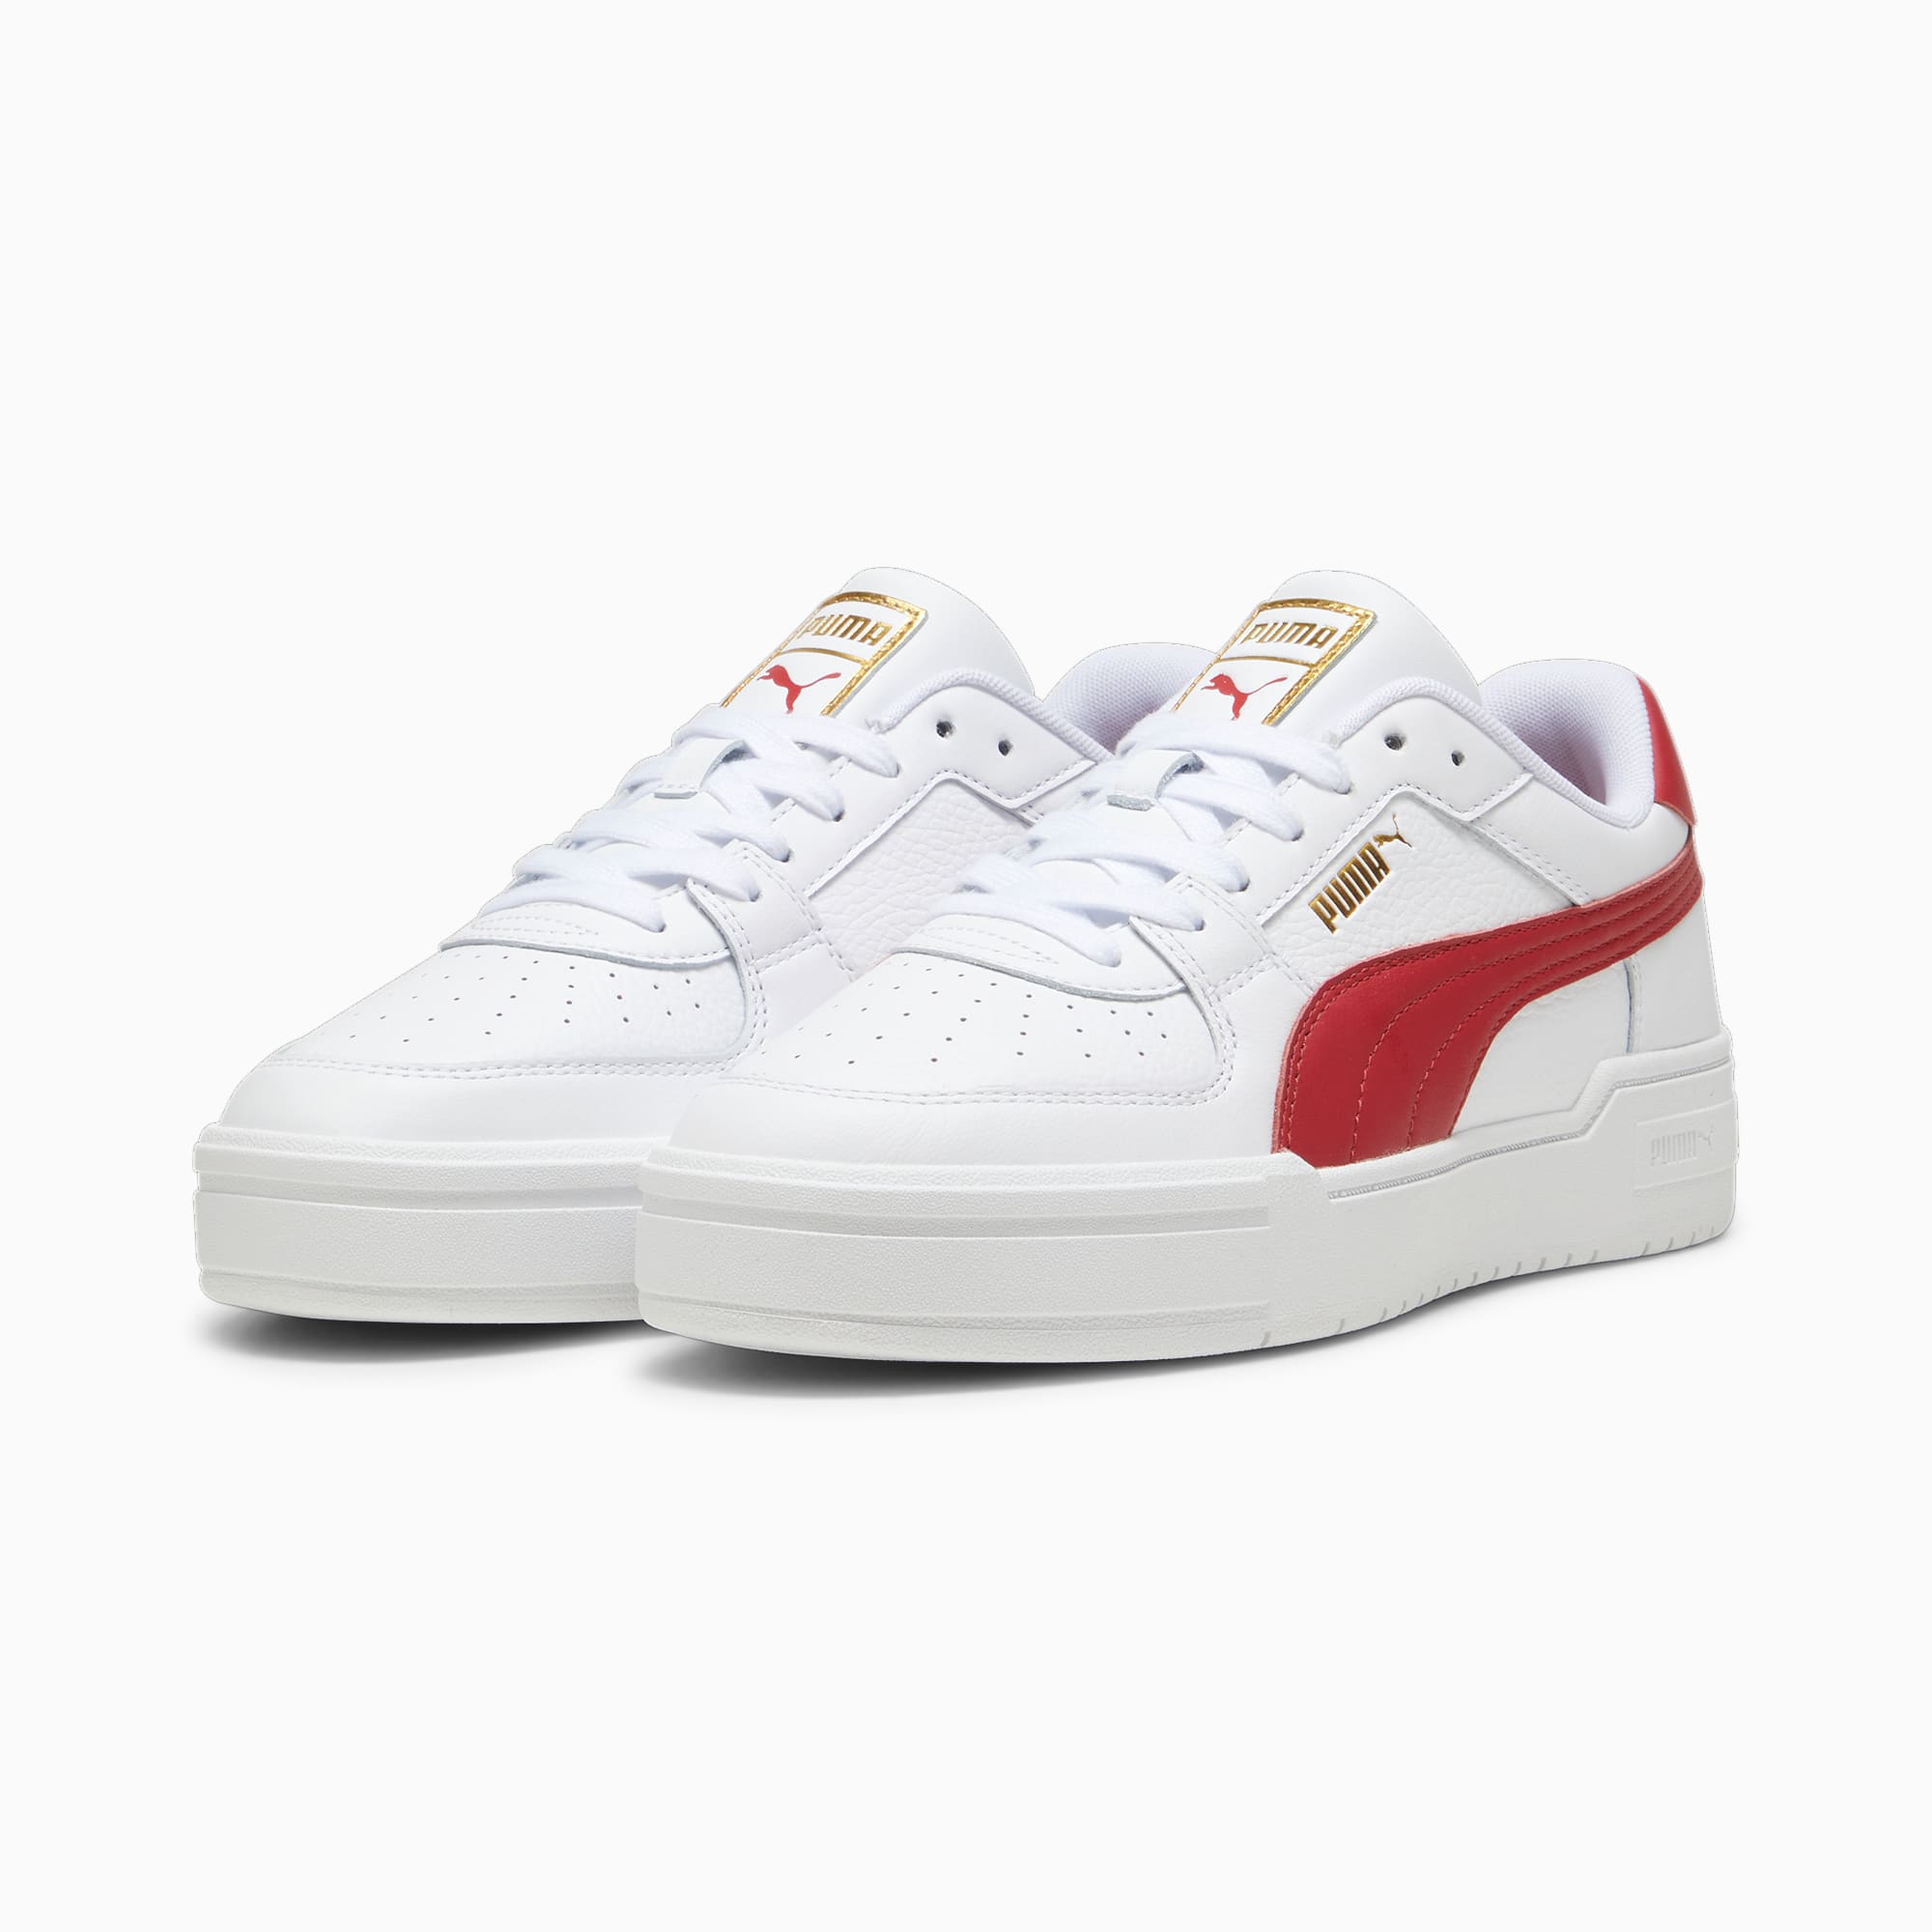 PUMA Chaussure Sneakers CA Pro Classic, Or/Rouge/Blanc